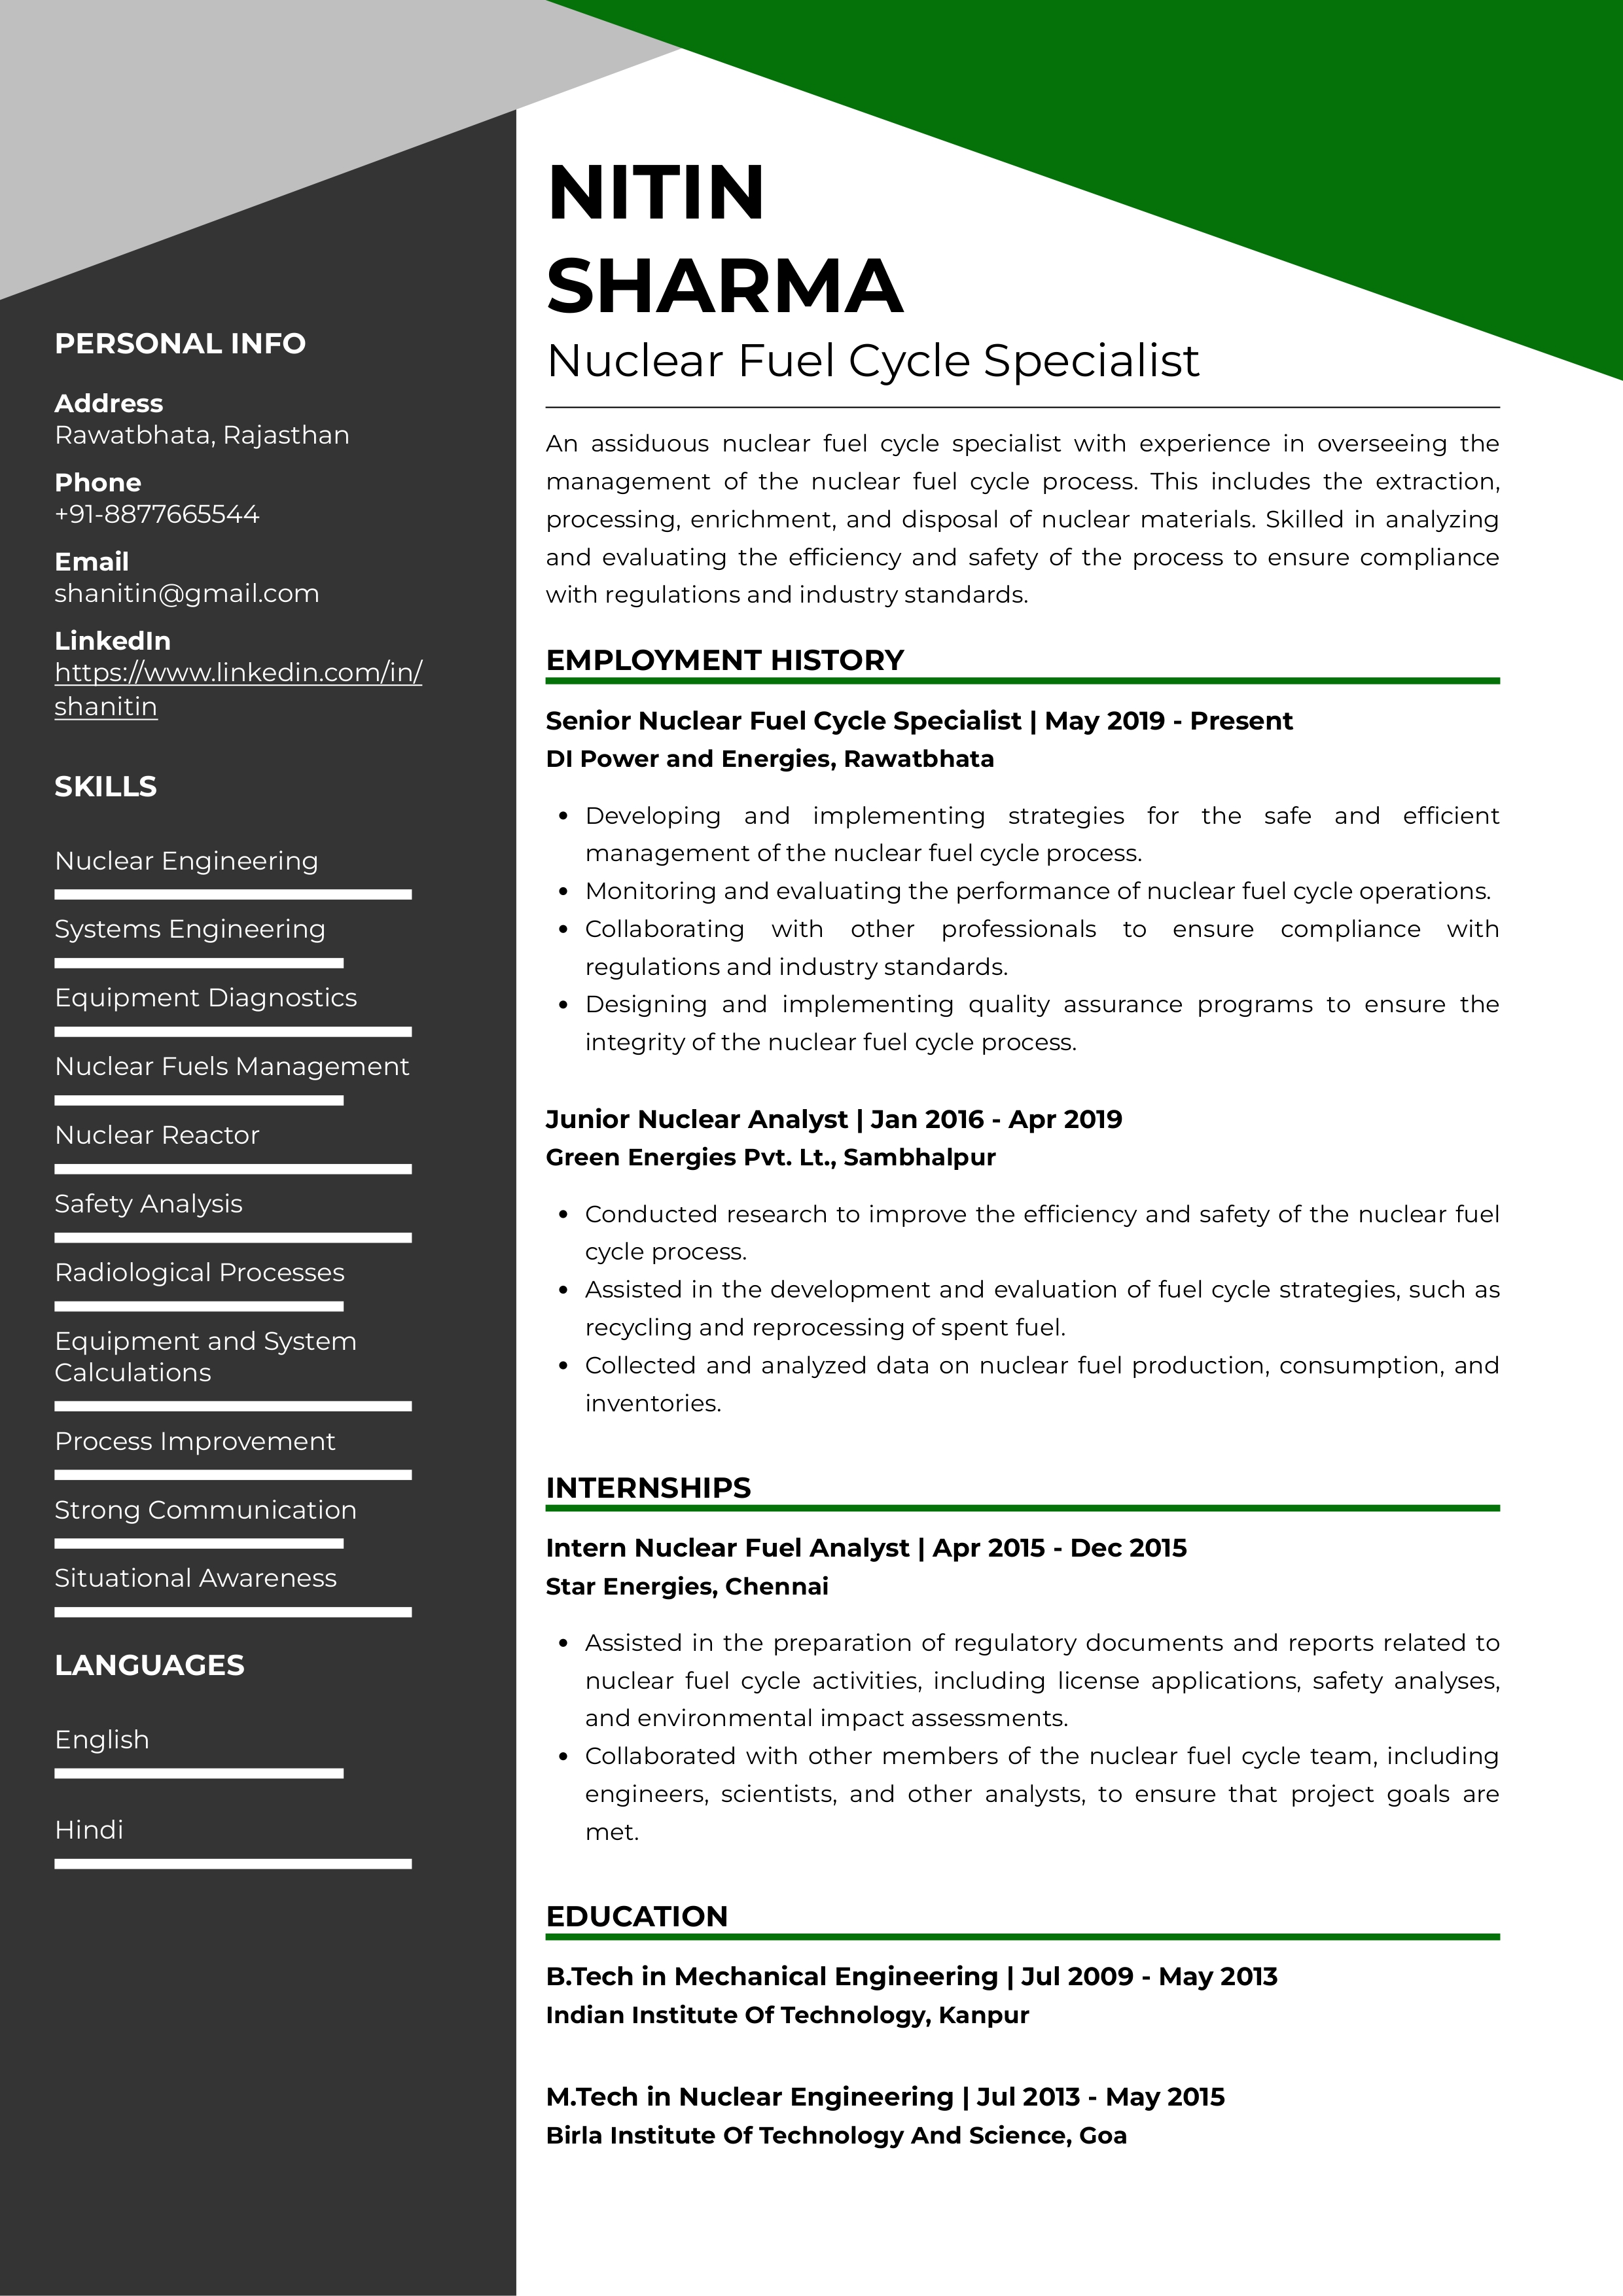 Sample Resume of Nuclear Fuel Cycle Specialist | Free Resume Templates & Samples on Resumod.co